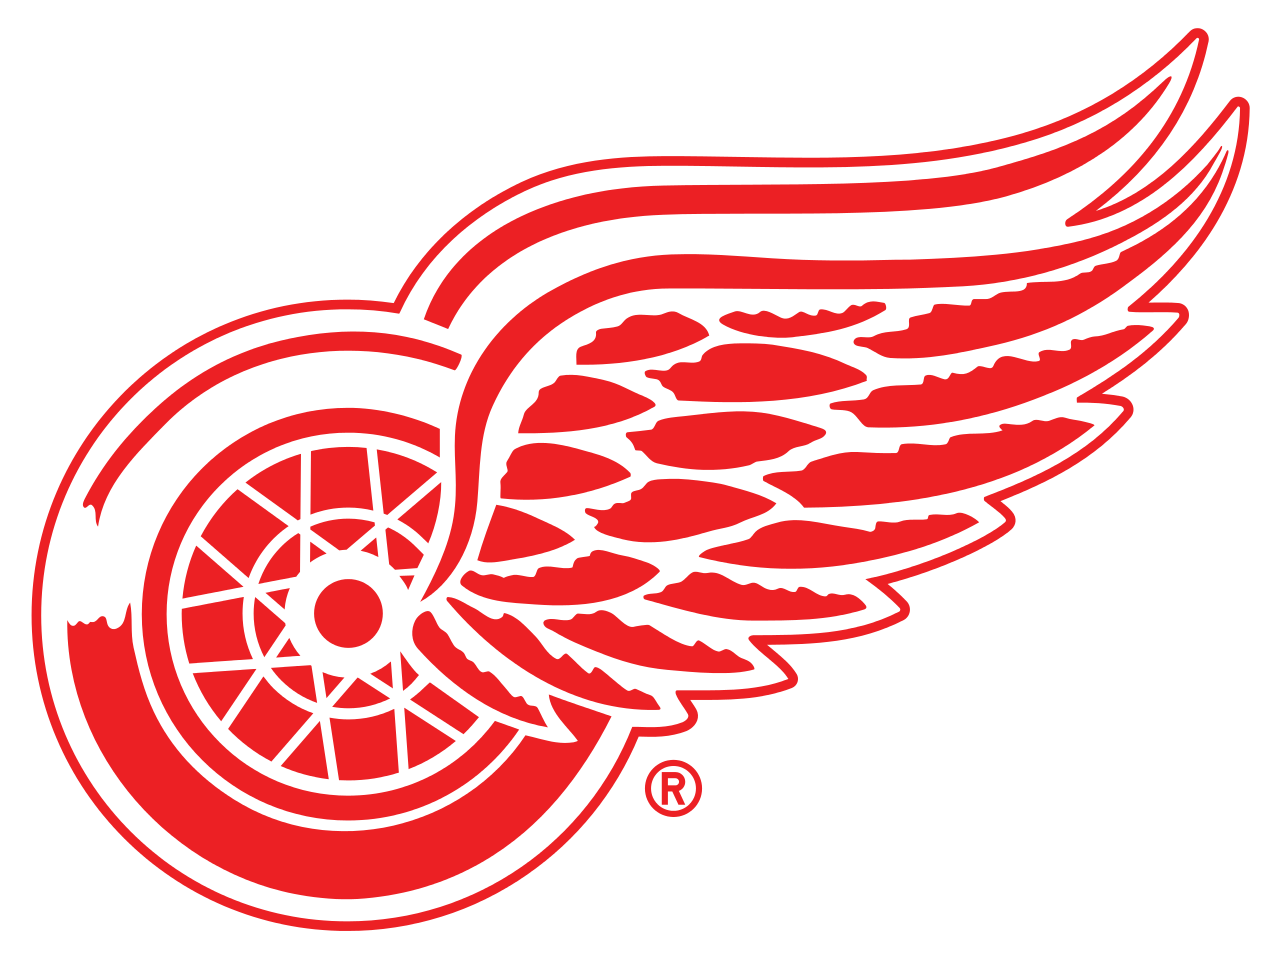 File:Detroit Red Wings logo.svg - Wikipedia, the free encyclopedia